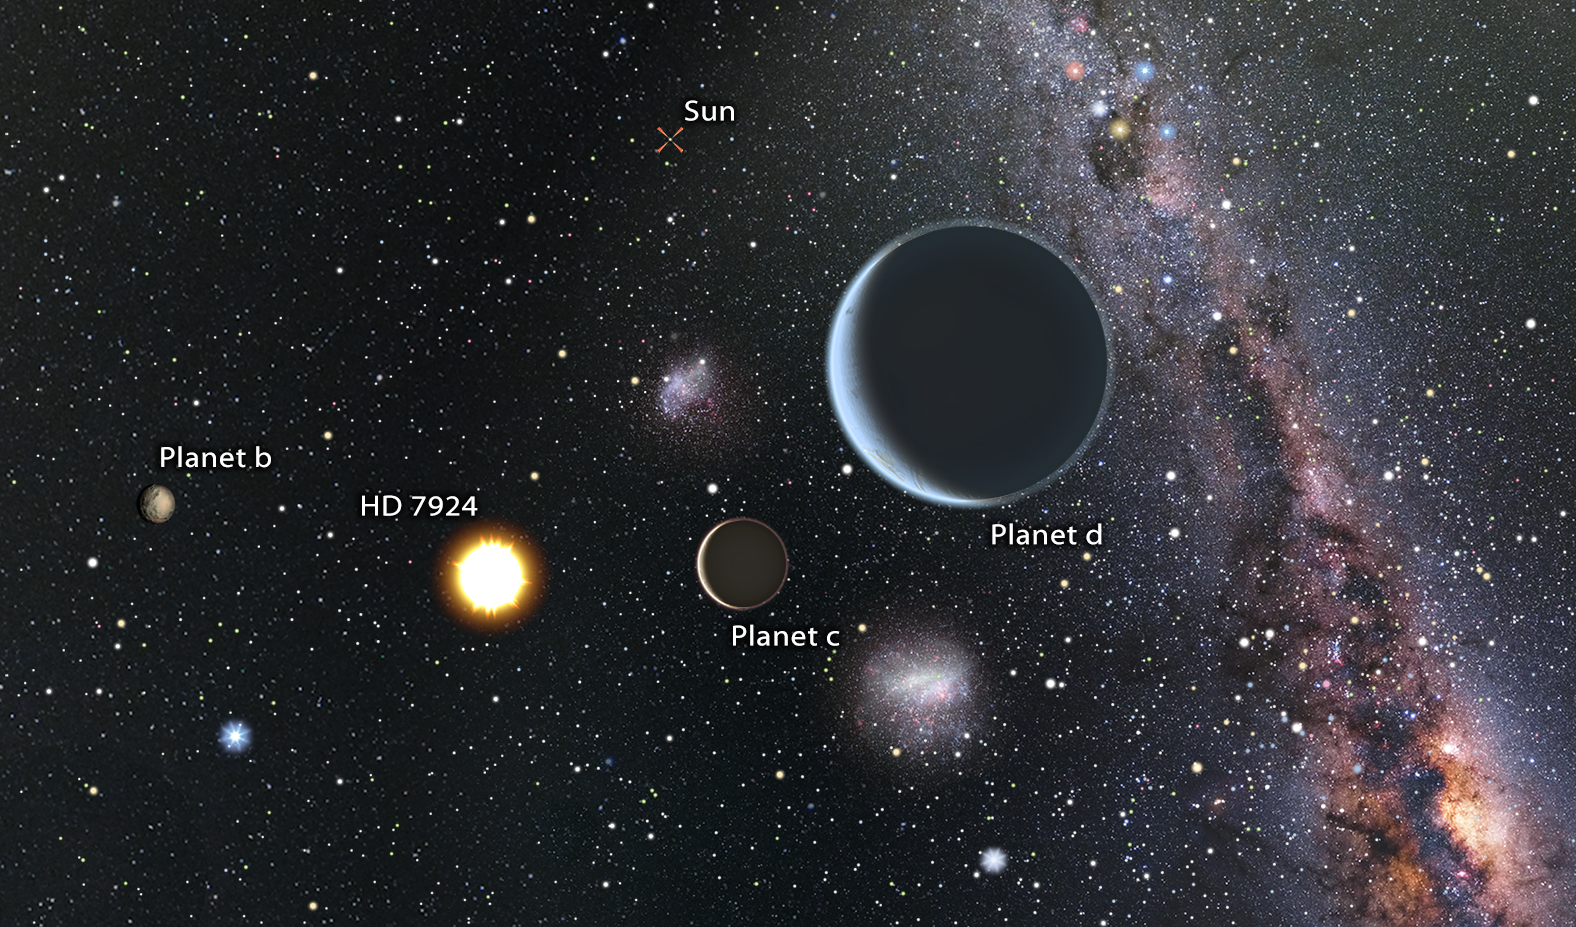 Artist’s impression of a view from the HD 7924 planetary system looking back toward our sun, which would be easily visible to the naked eye. Since HD 7924 is in our northern sky, an observer looking back at the sun would see objects like the Southern Cross and the Magellanic Clouds close to our sun in their sky. Art by Karen Teramura & BJ Fulton, UH IfA.